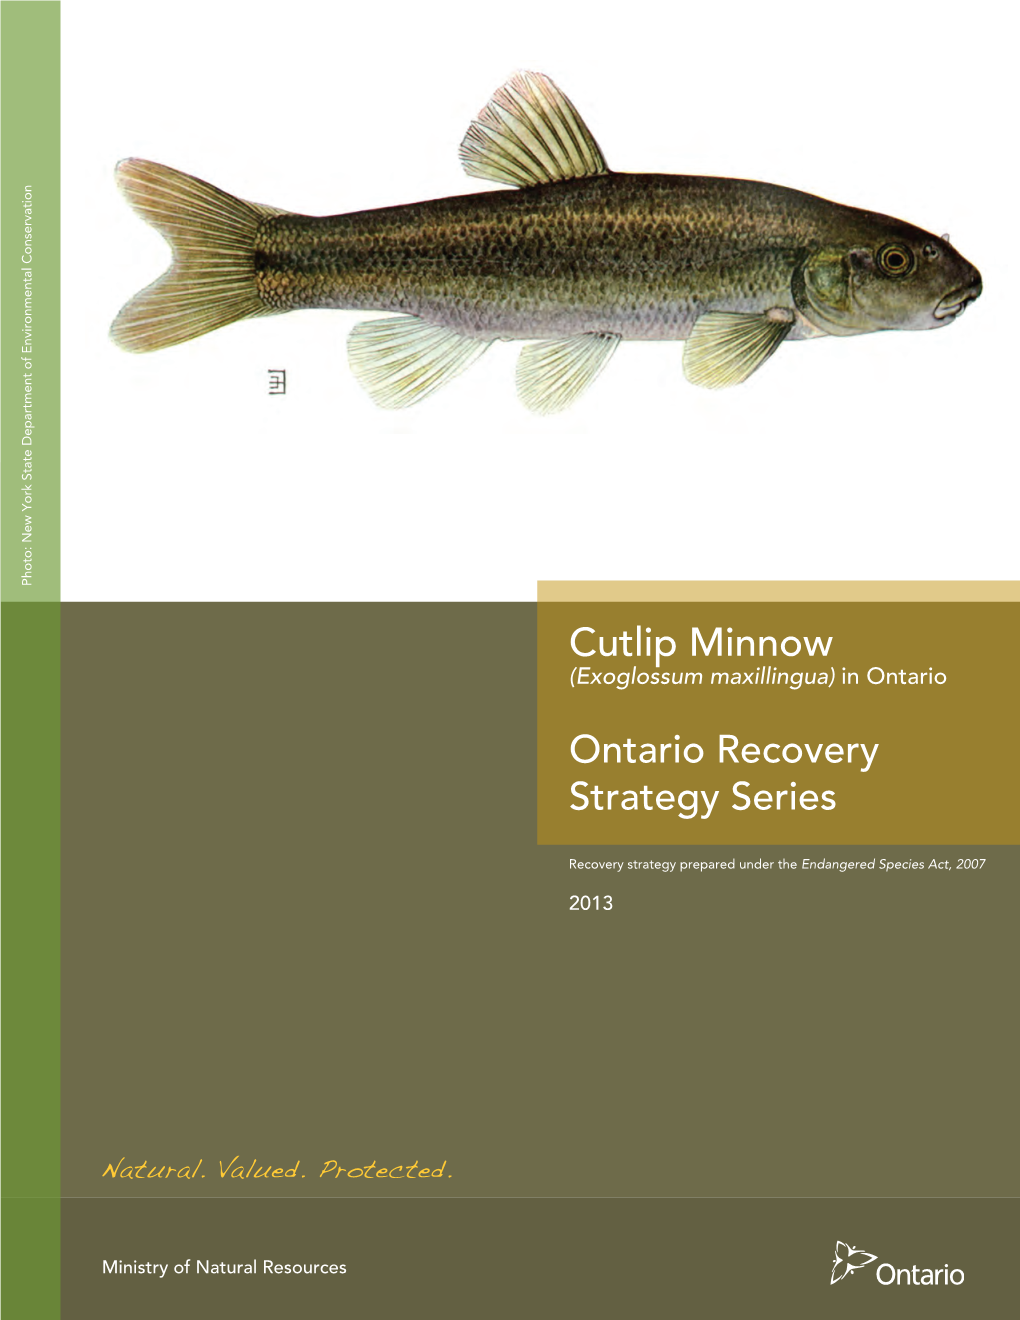 Recovery Strategy for the Cutlip Minnow (Exoglossum Maxillingua) in Ontario